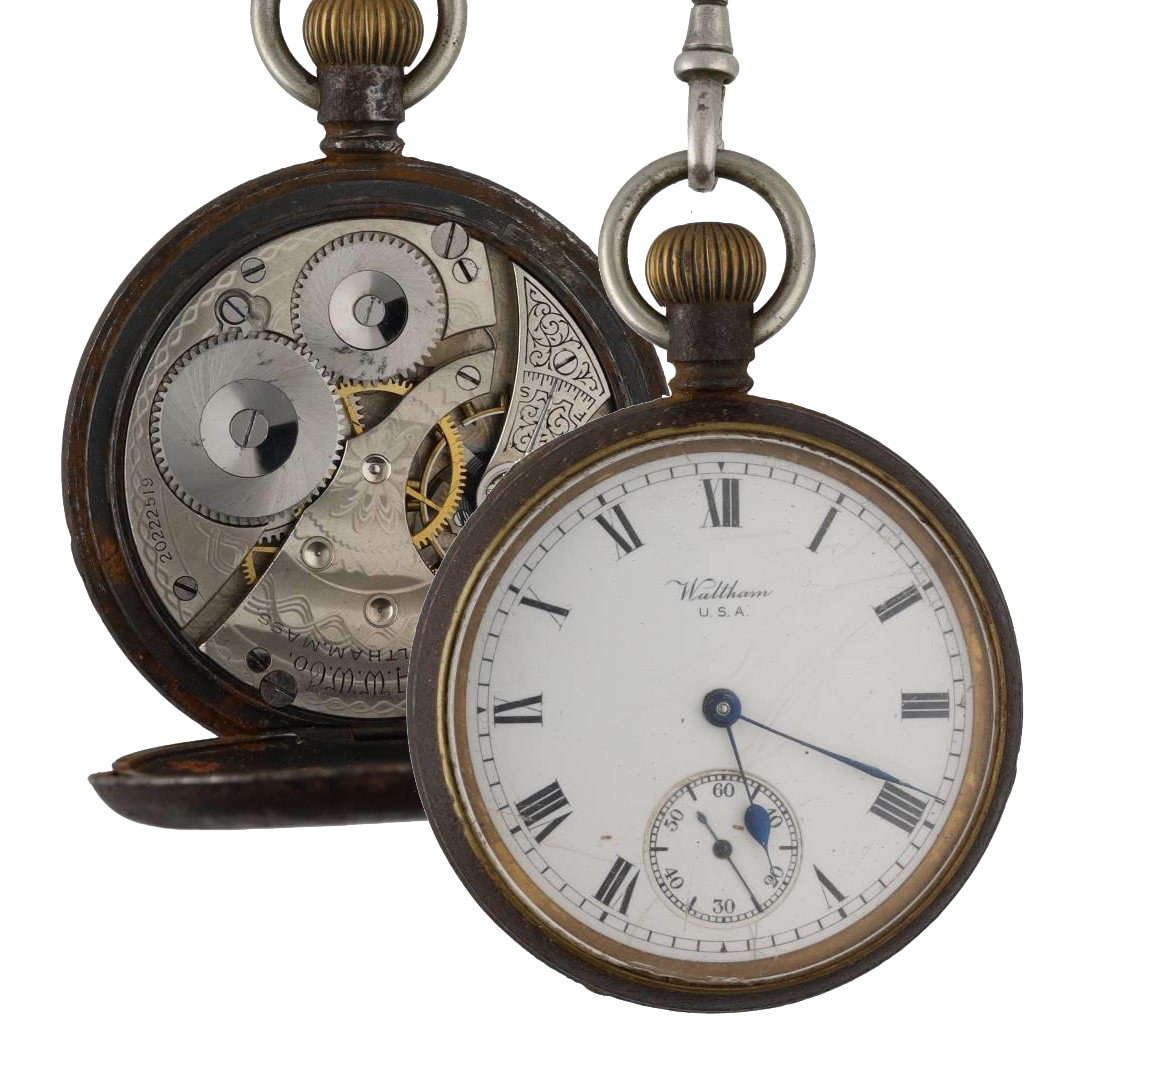 American Waltham gun metal lever pocket watch, circa 1915, serial no. 20222519, signed movement with